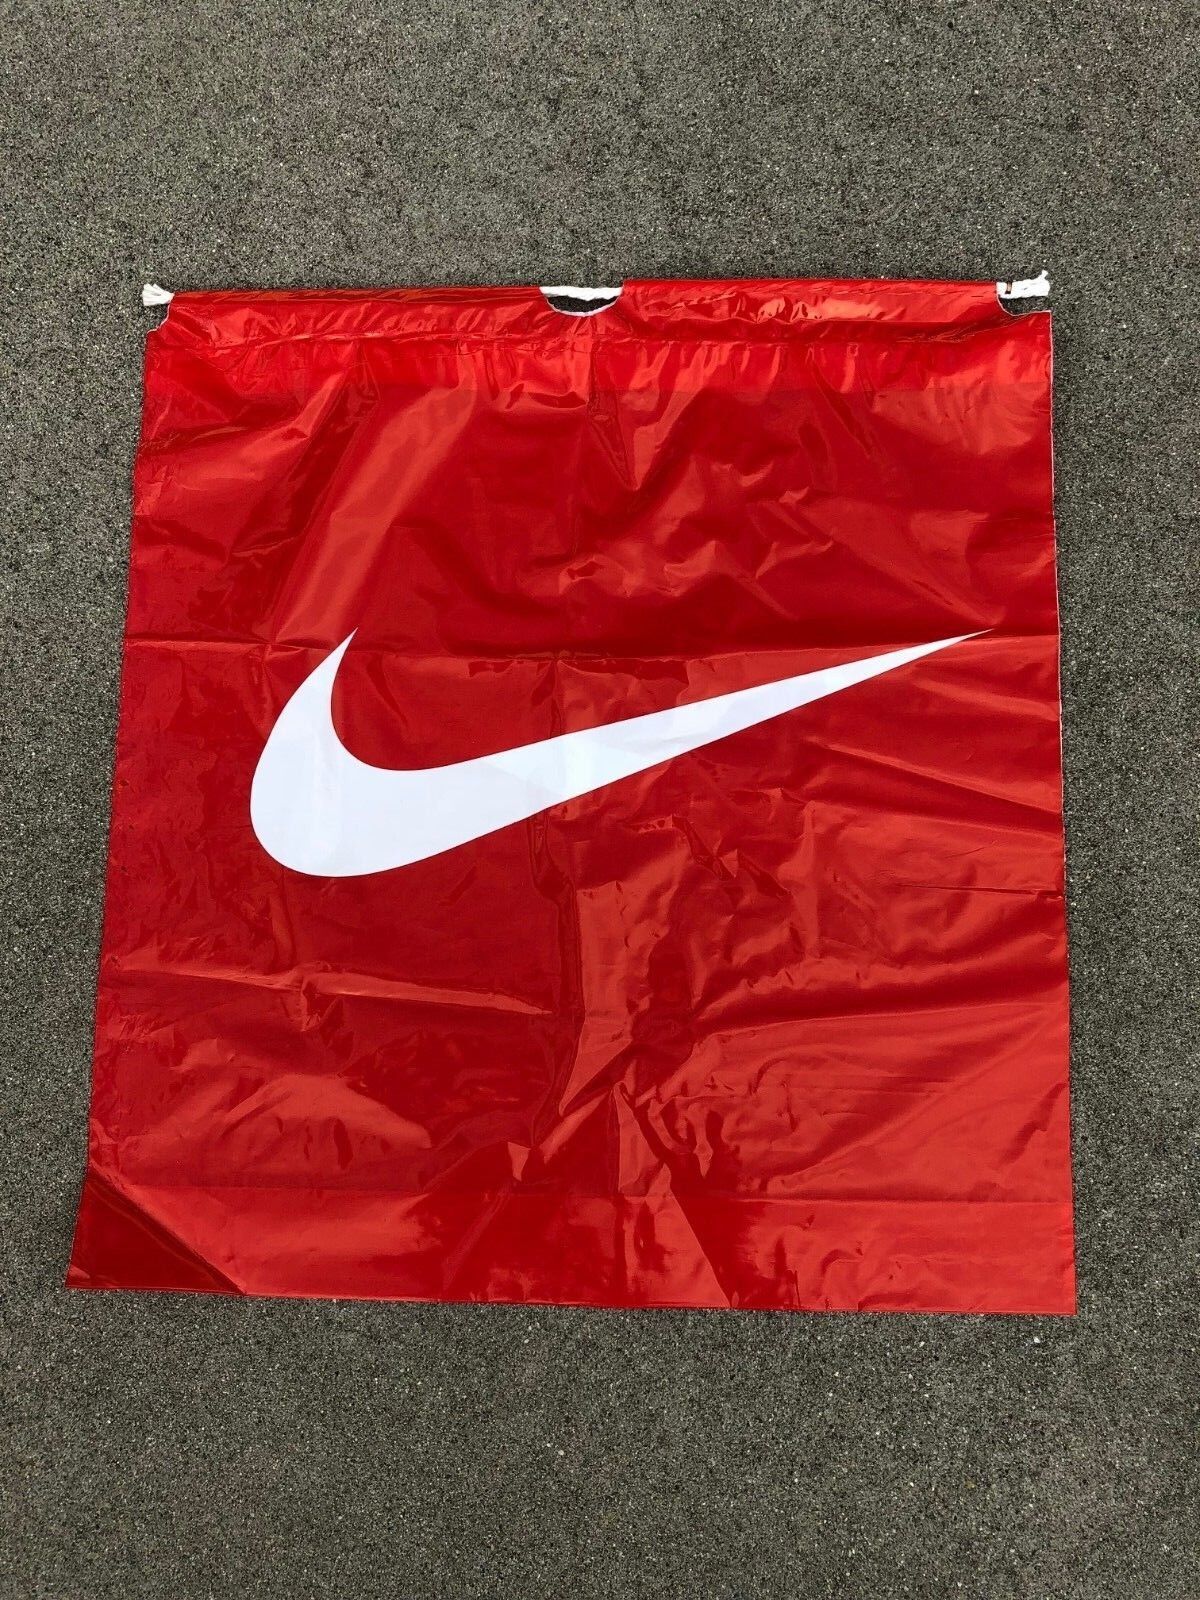 NIKE Vintage Ad Poly Shopping Bags 20.5\